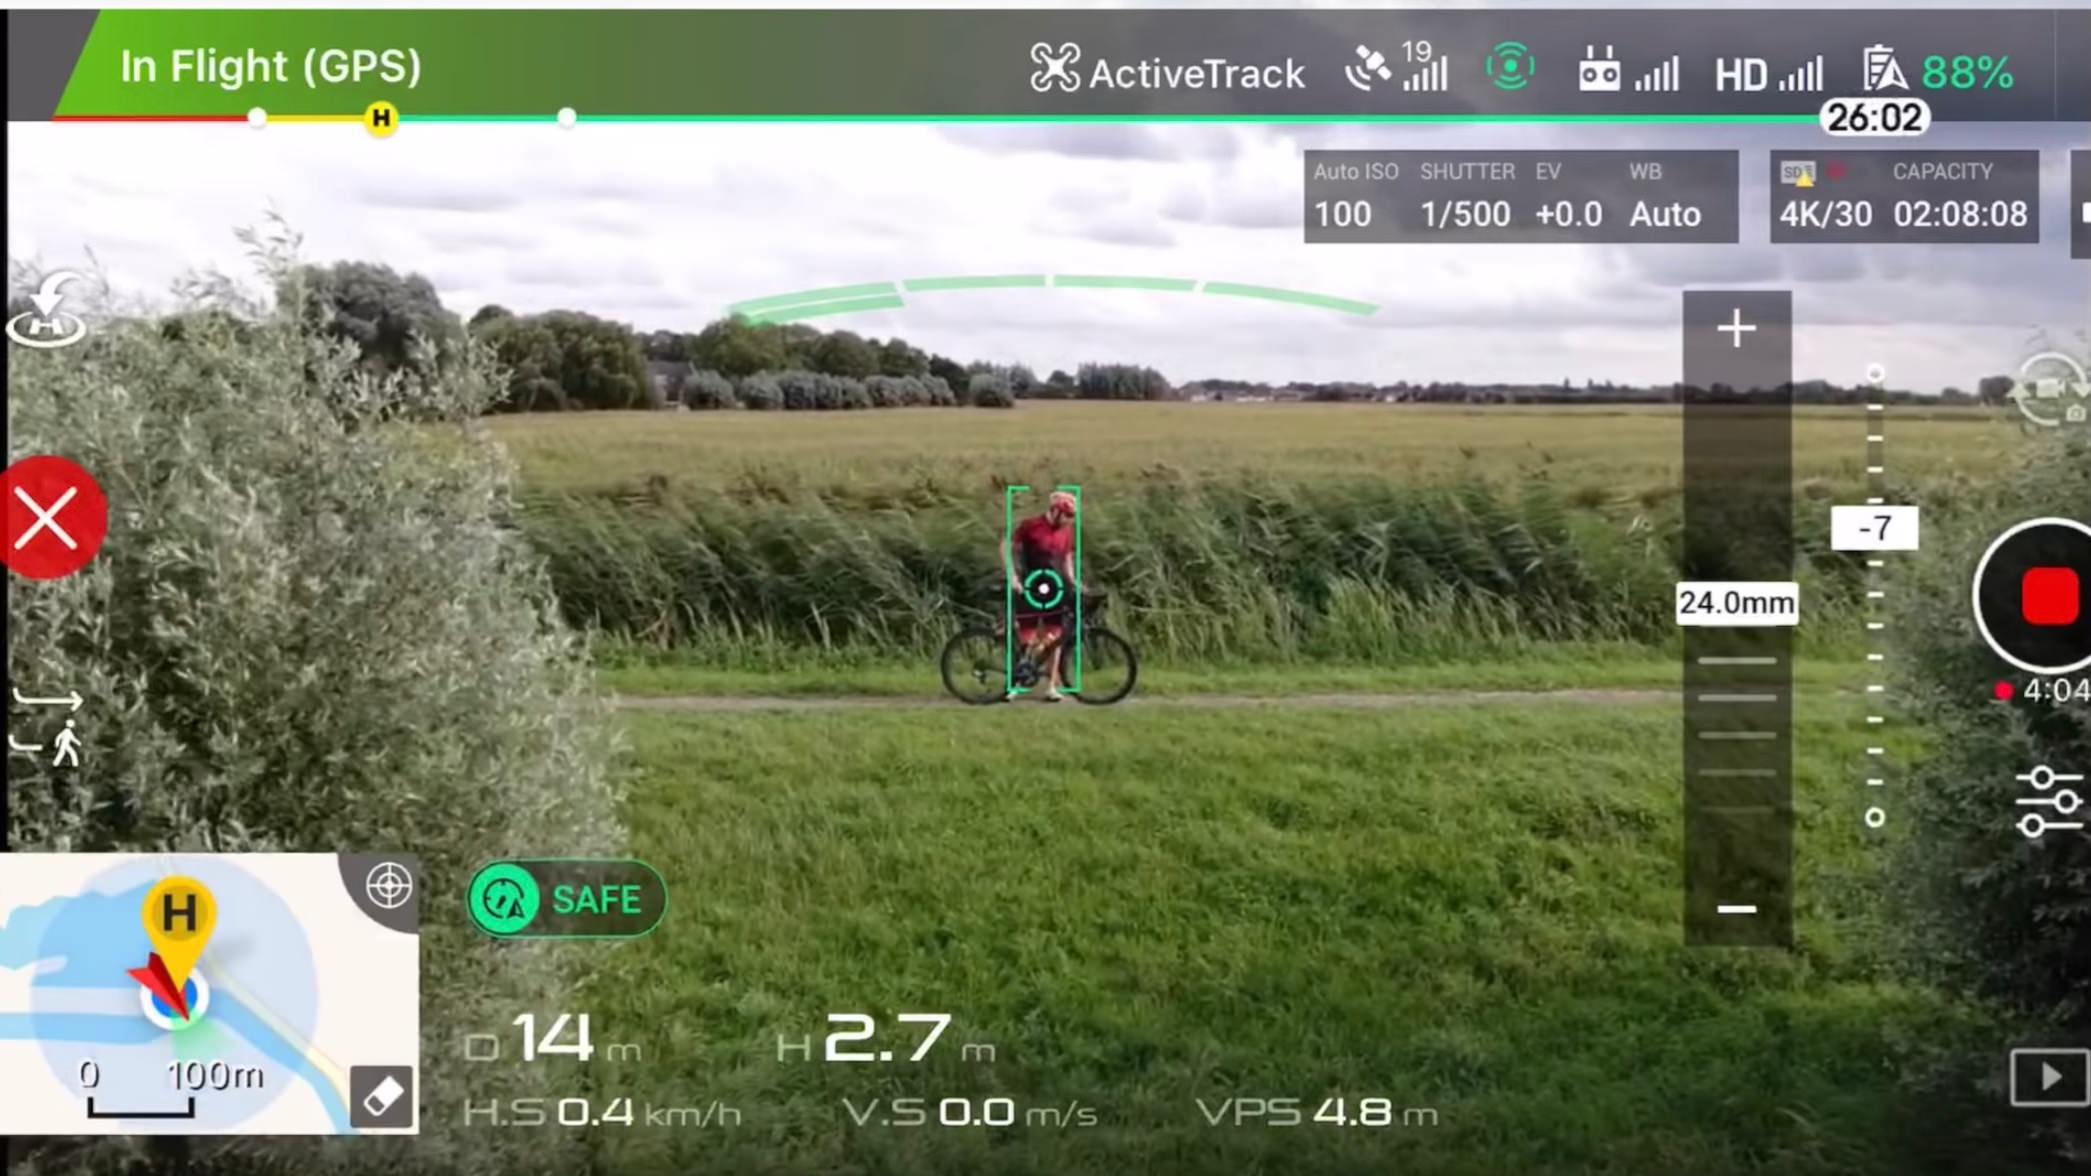 DJI ActiveTrack 2.0 on the Mavic 2 Zoom and Pro tested DC Rainmaker [video]